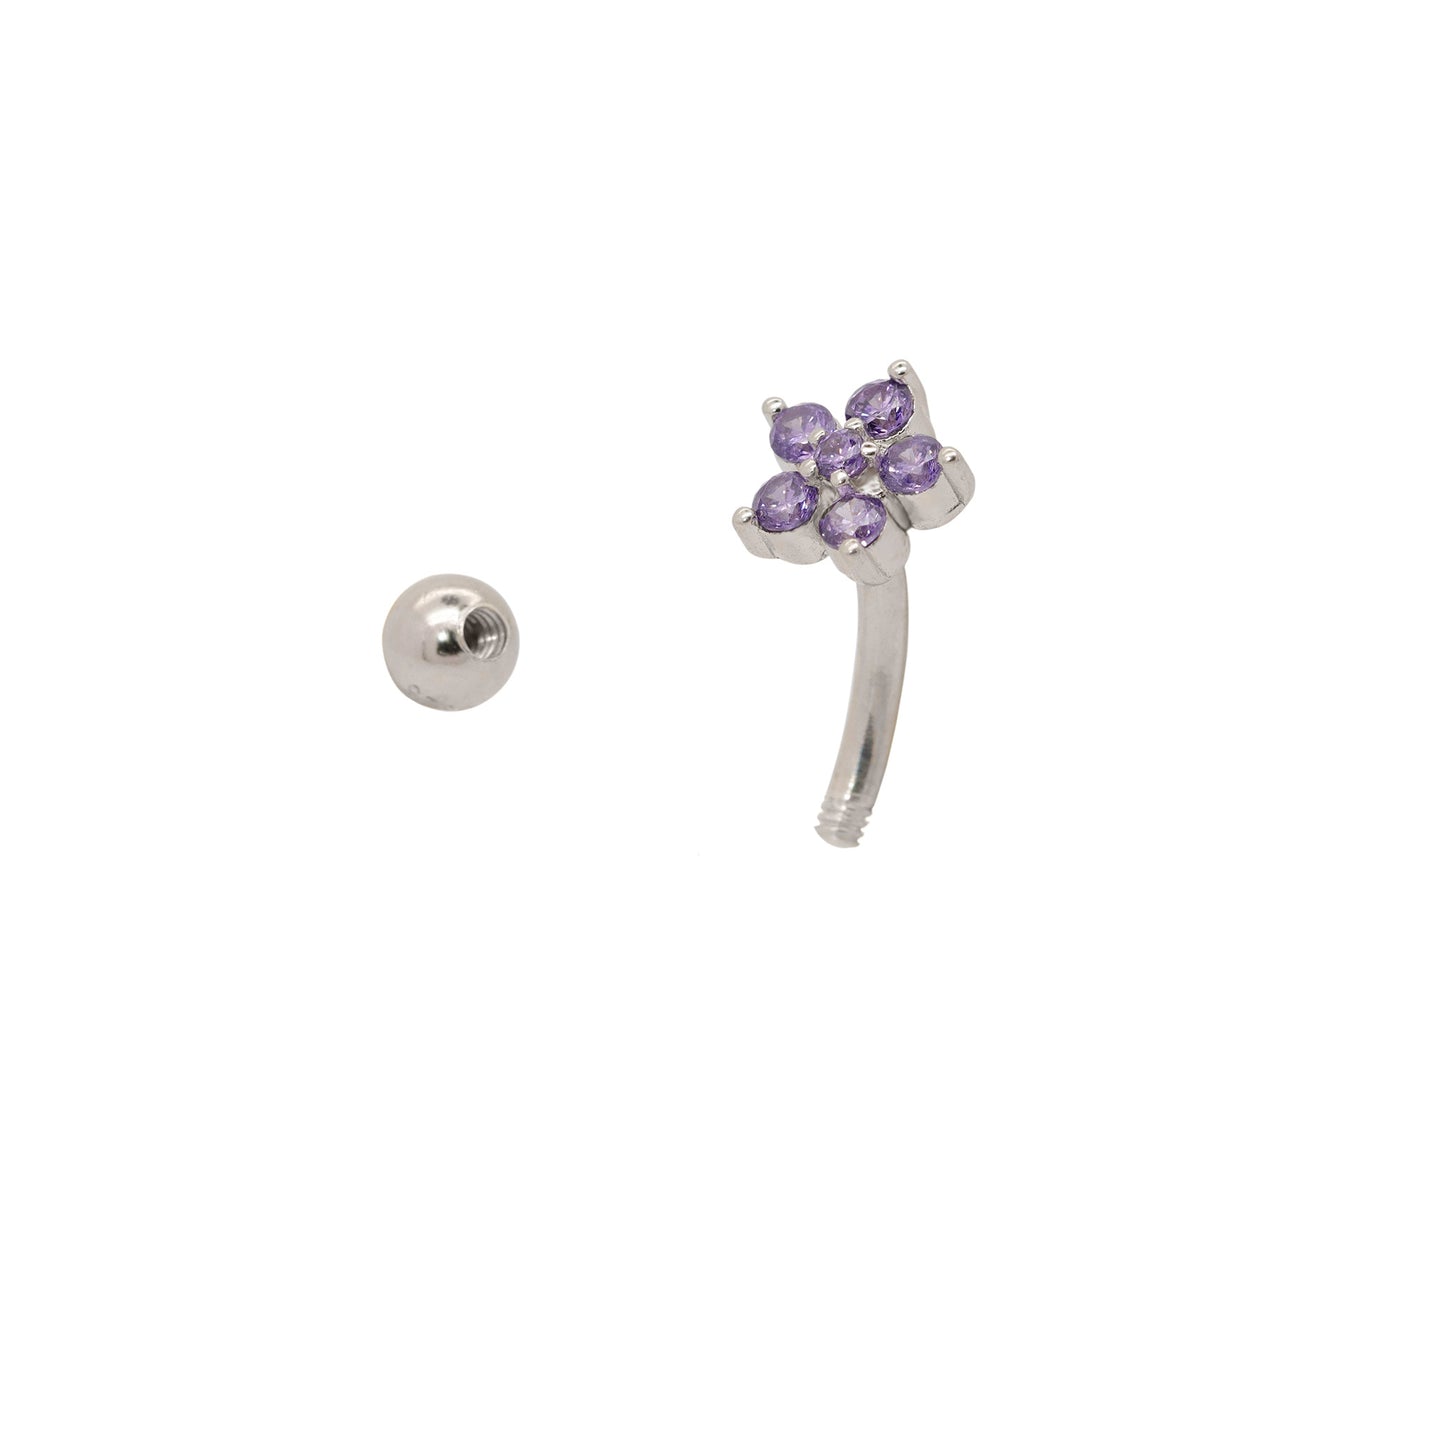 Solid 925 Silver | 16G 14G Purple Petite Flower Reverse Belly Ring | 6mm 1/4" 8mm 5/16" 10mm 3/8" - Sturdy South